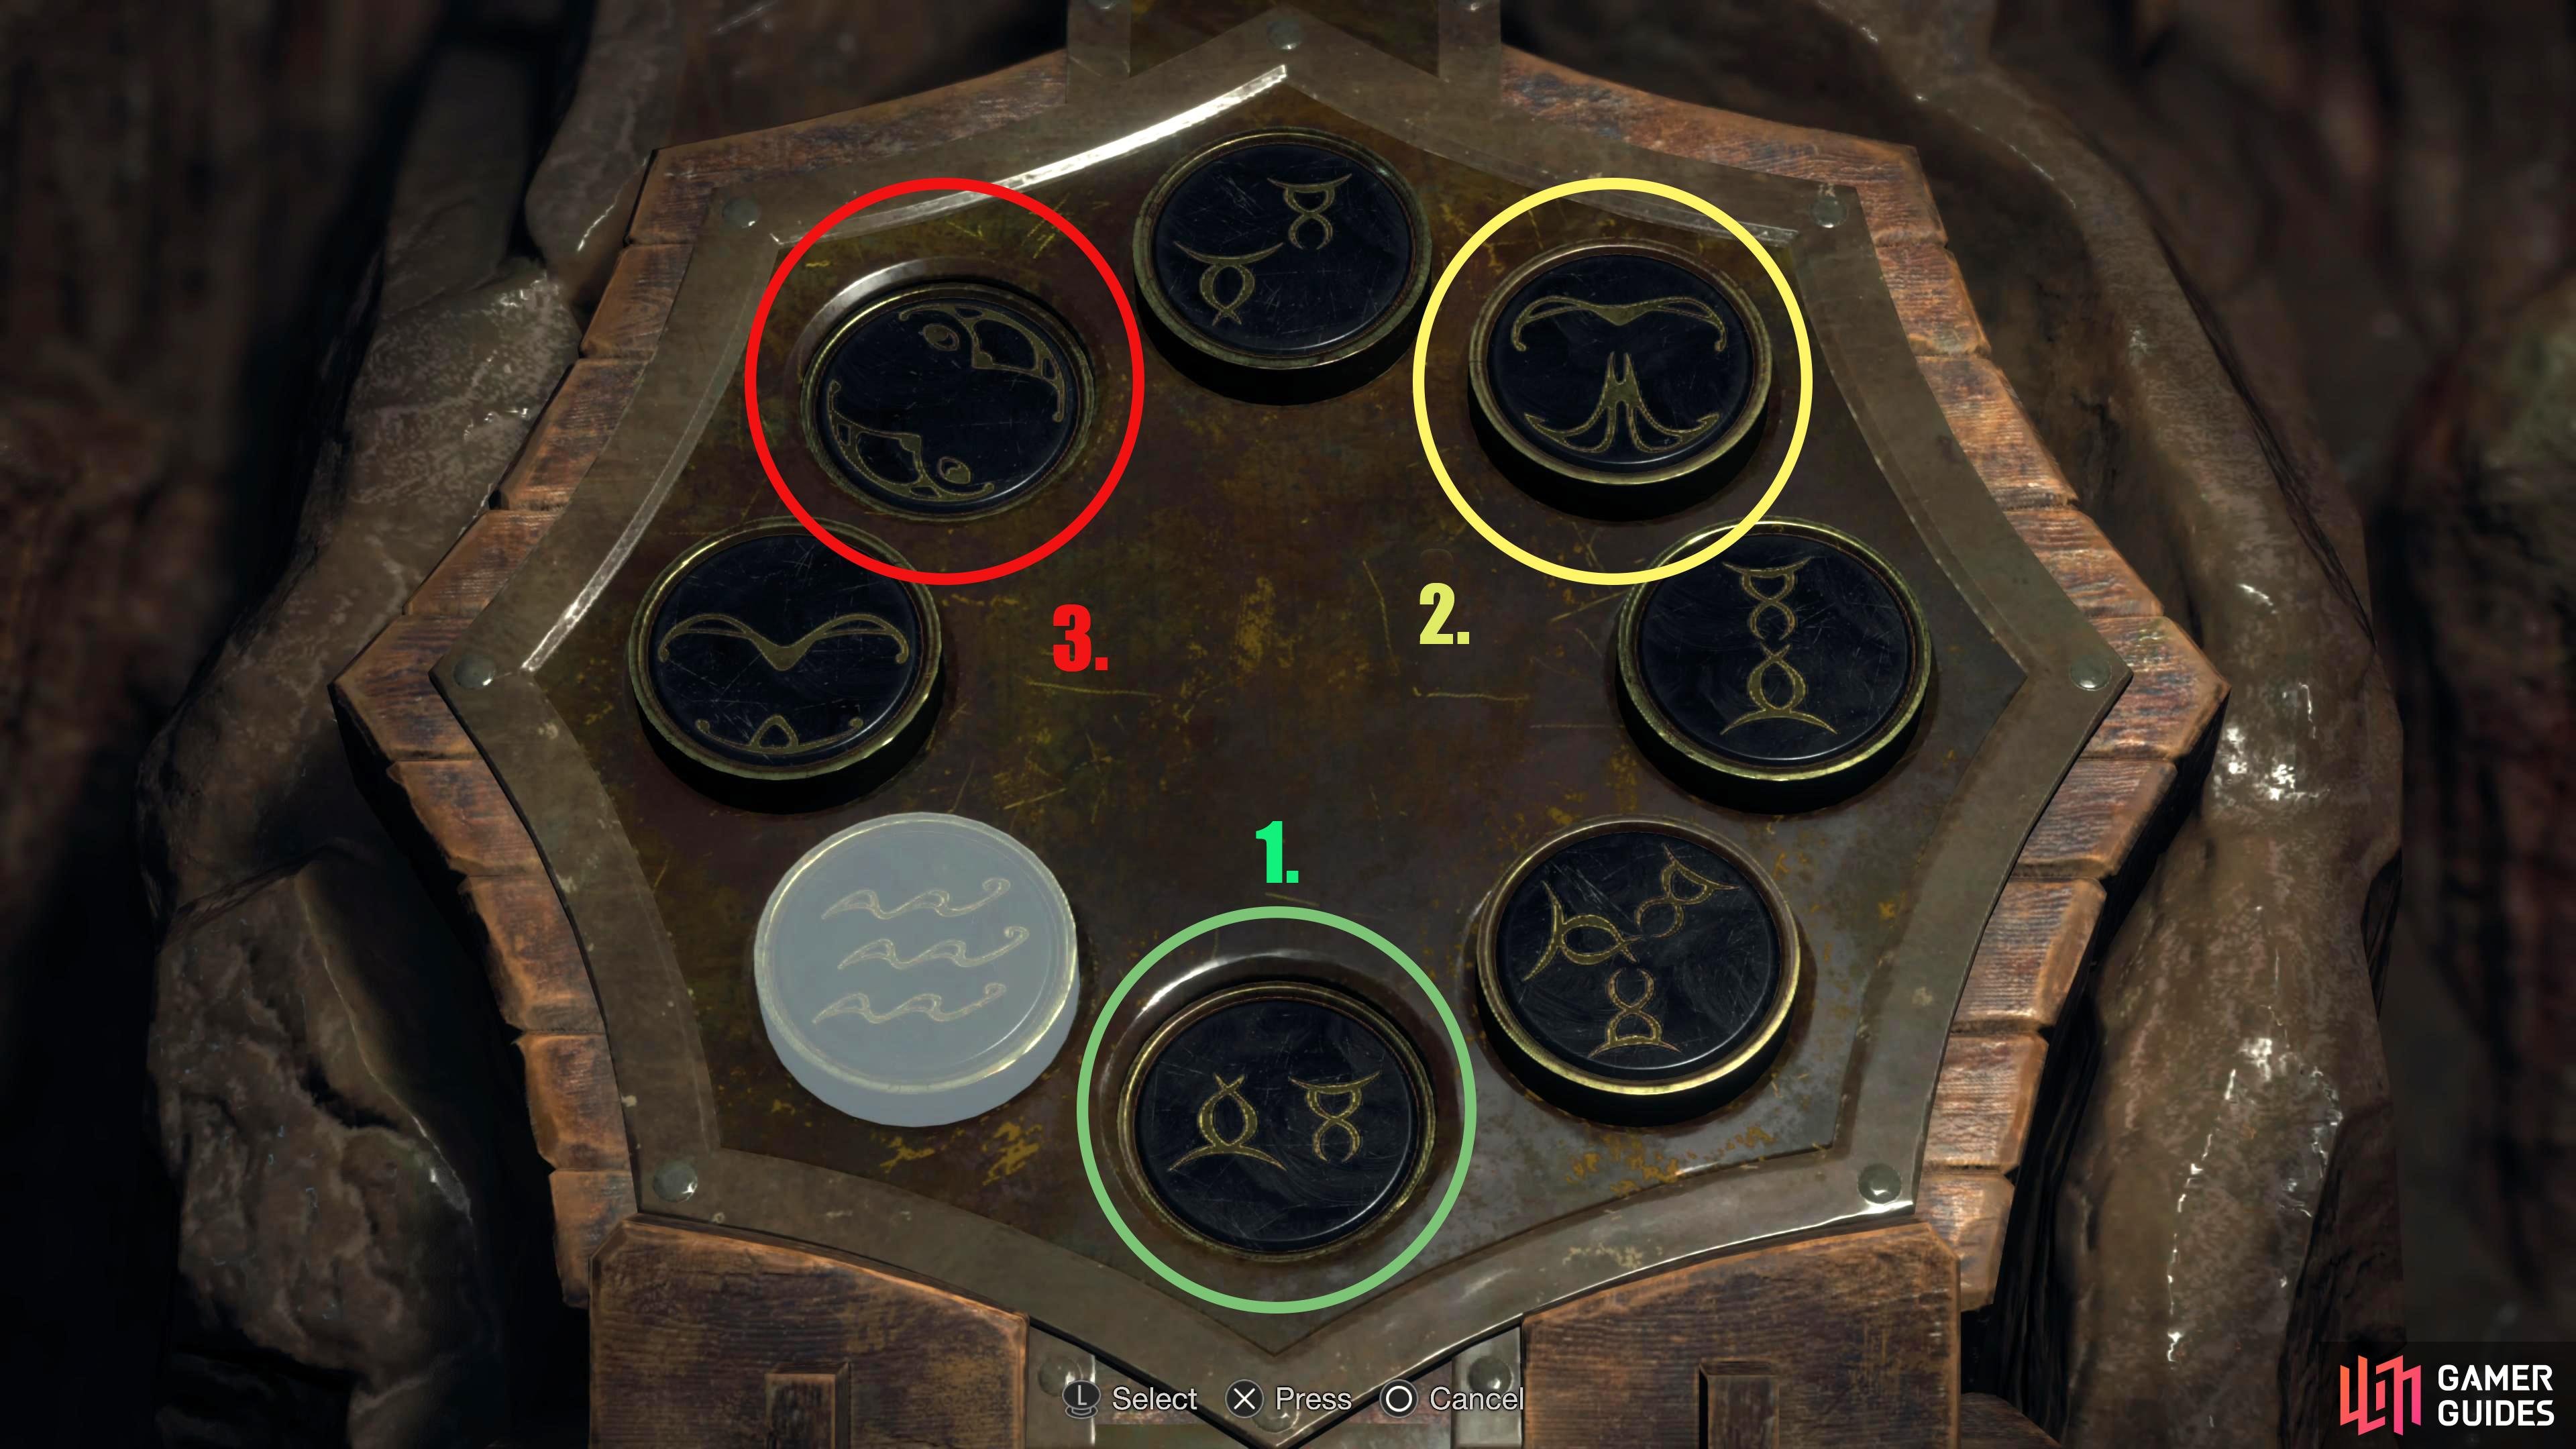 Resident Evil 4 remake: Grandfather Clock door puzzle guide